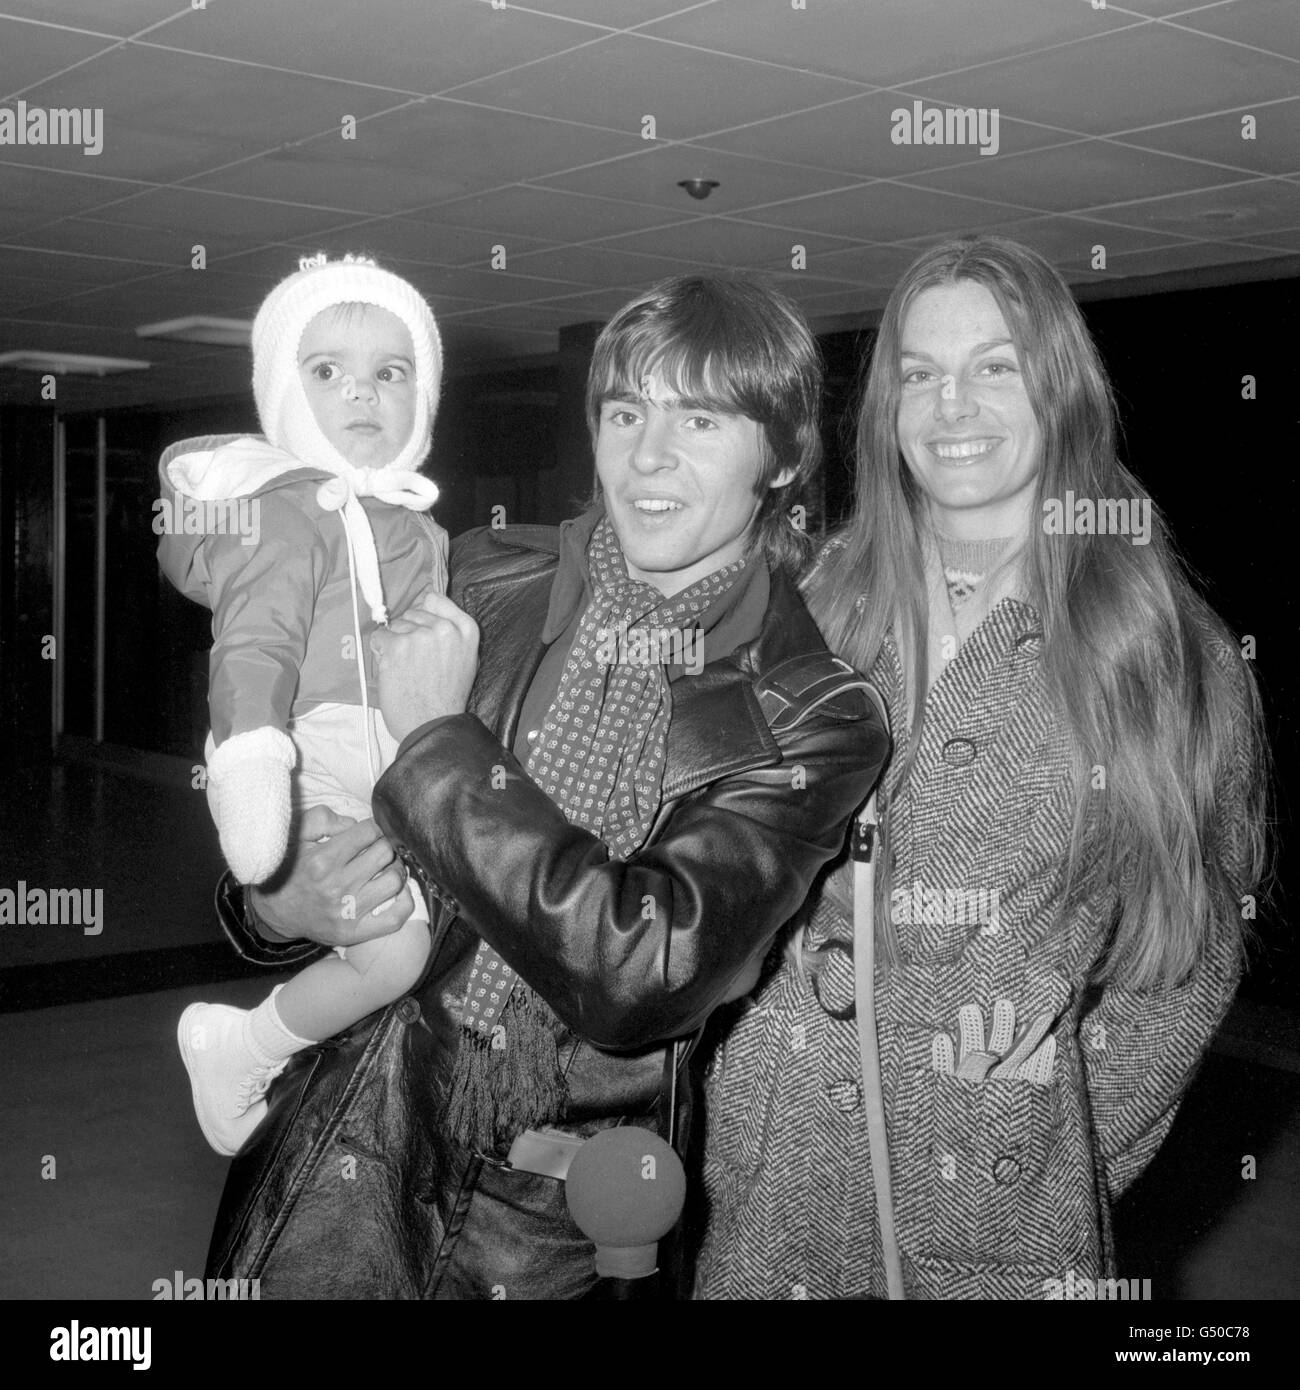 Davy Jones, the English member of the American pop group The Monkees, accompanied by his wife Linda and their 15 month old daughter Talia arrives at Heathrow Airport from Los Angeles. Stock Photo